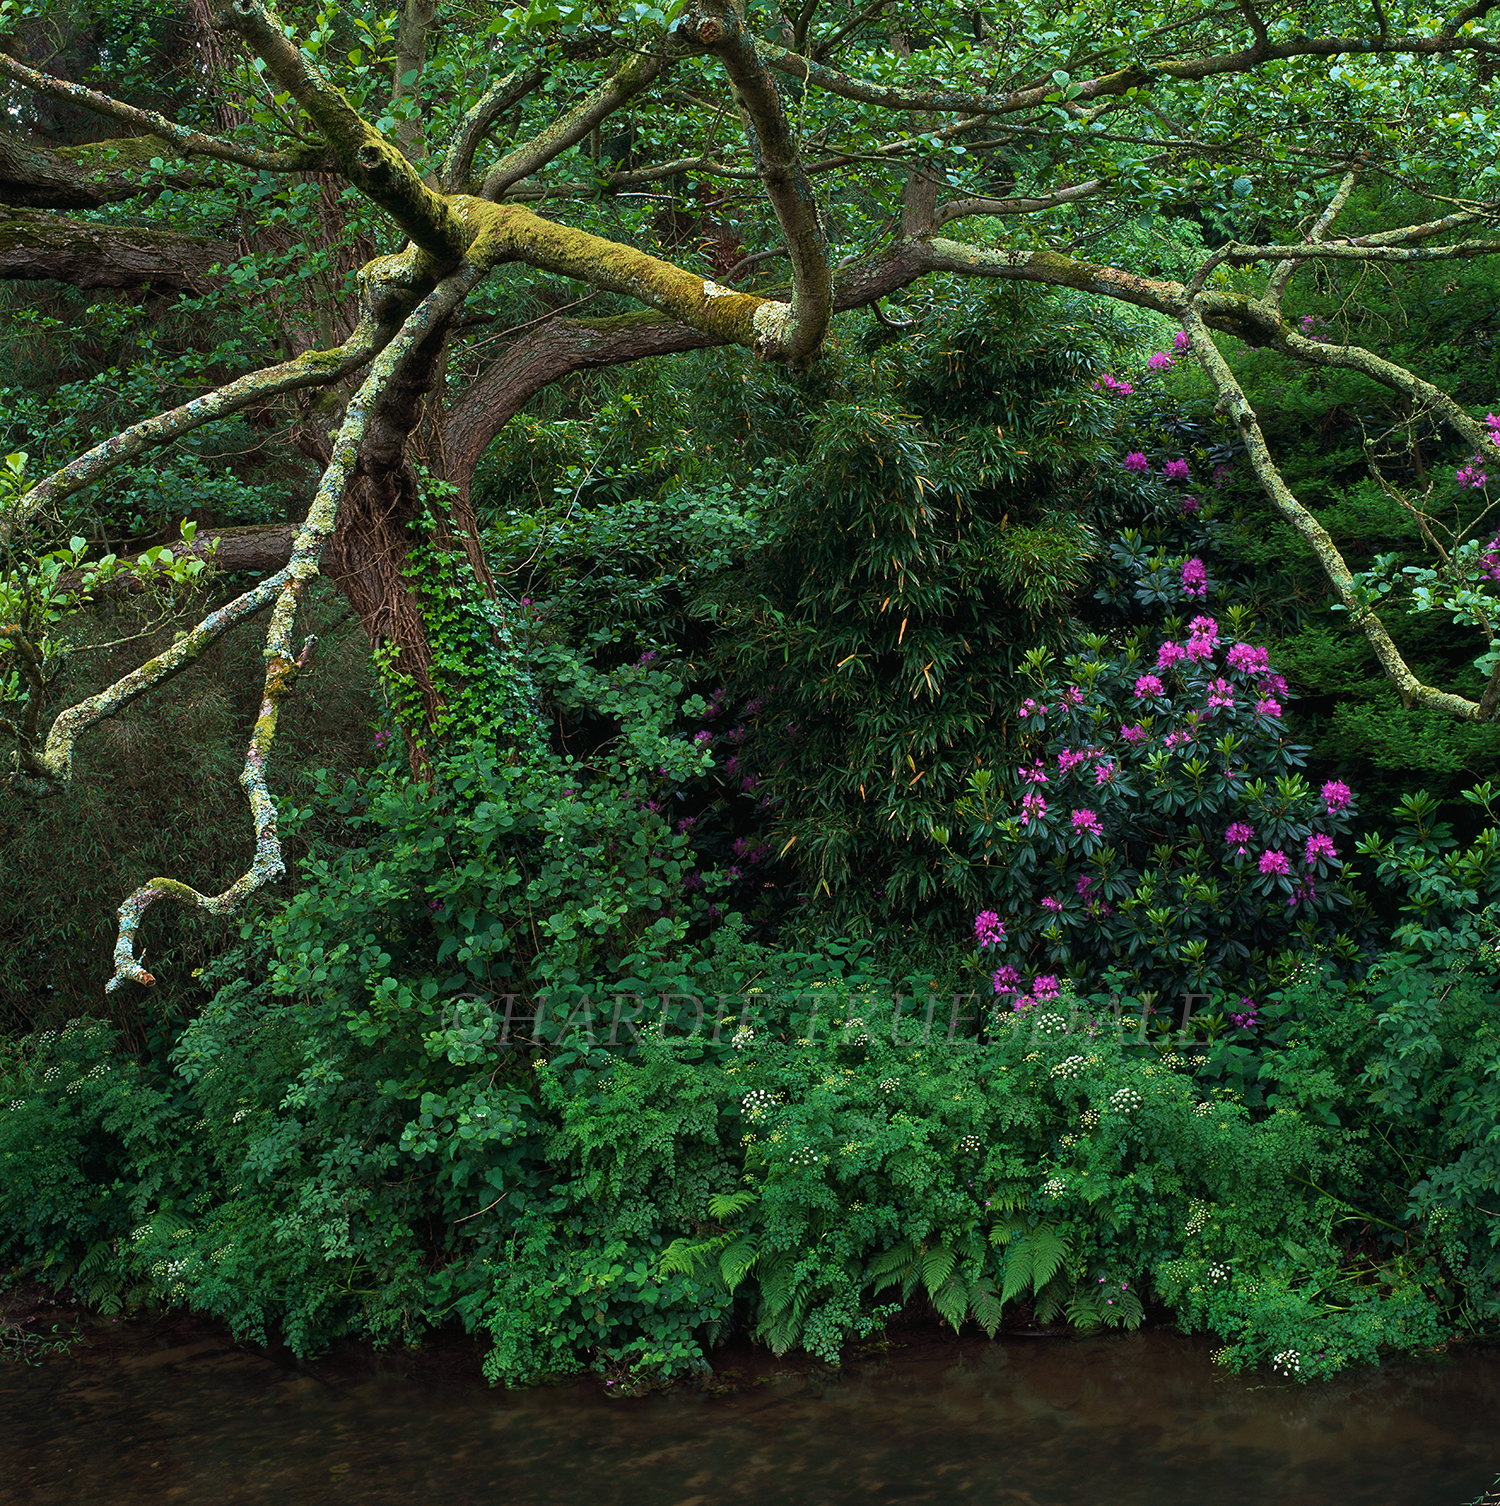  Eng#2 "Rhododendron", Dunster Castle Grounds, Exmoor National Park, England 